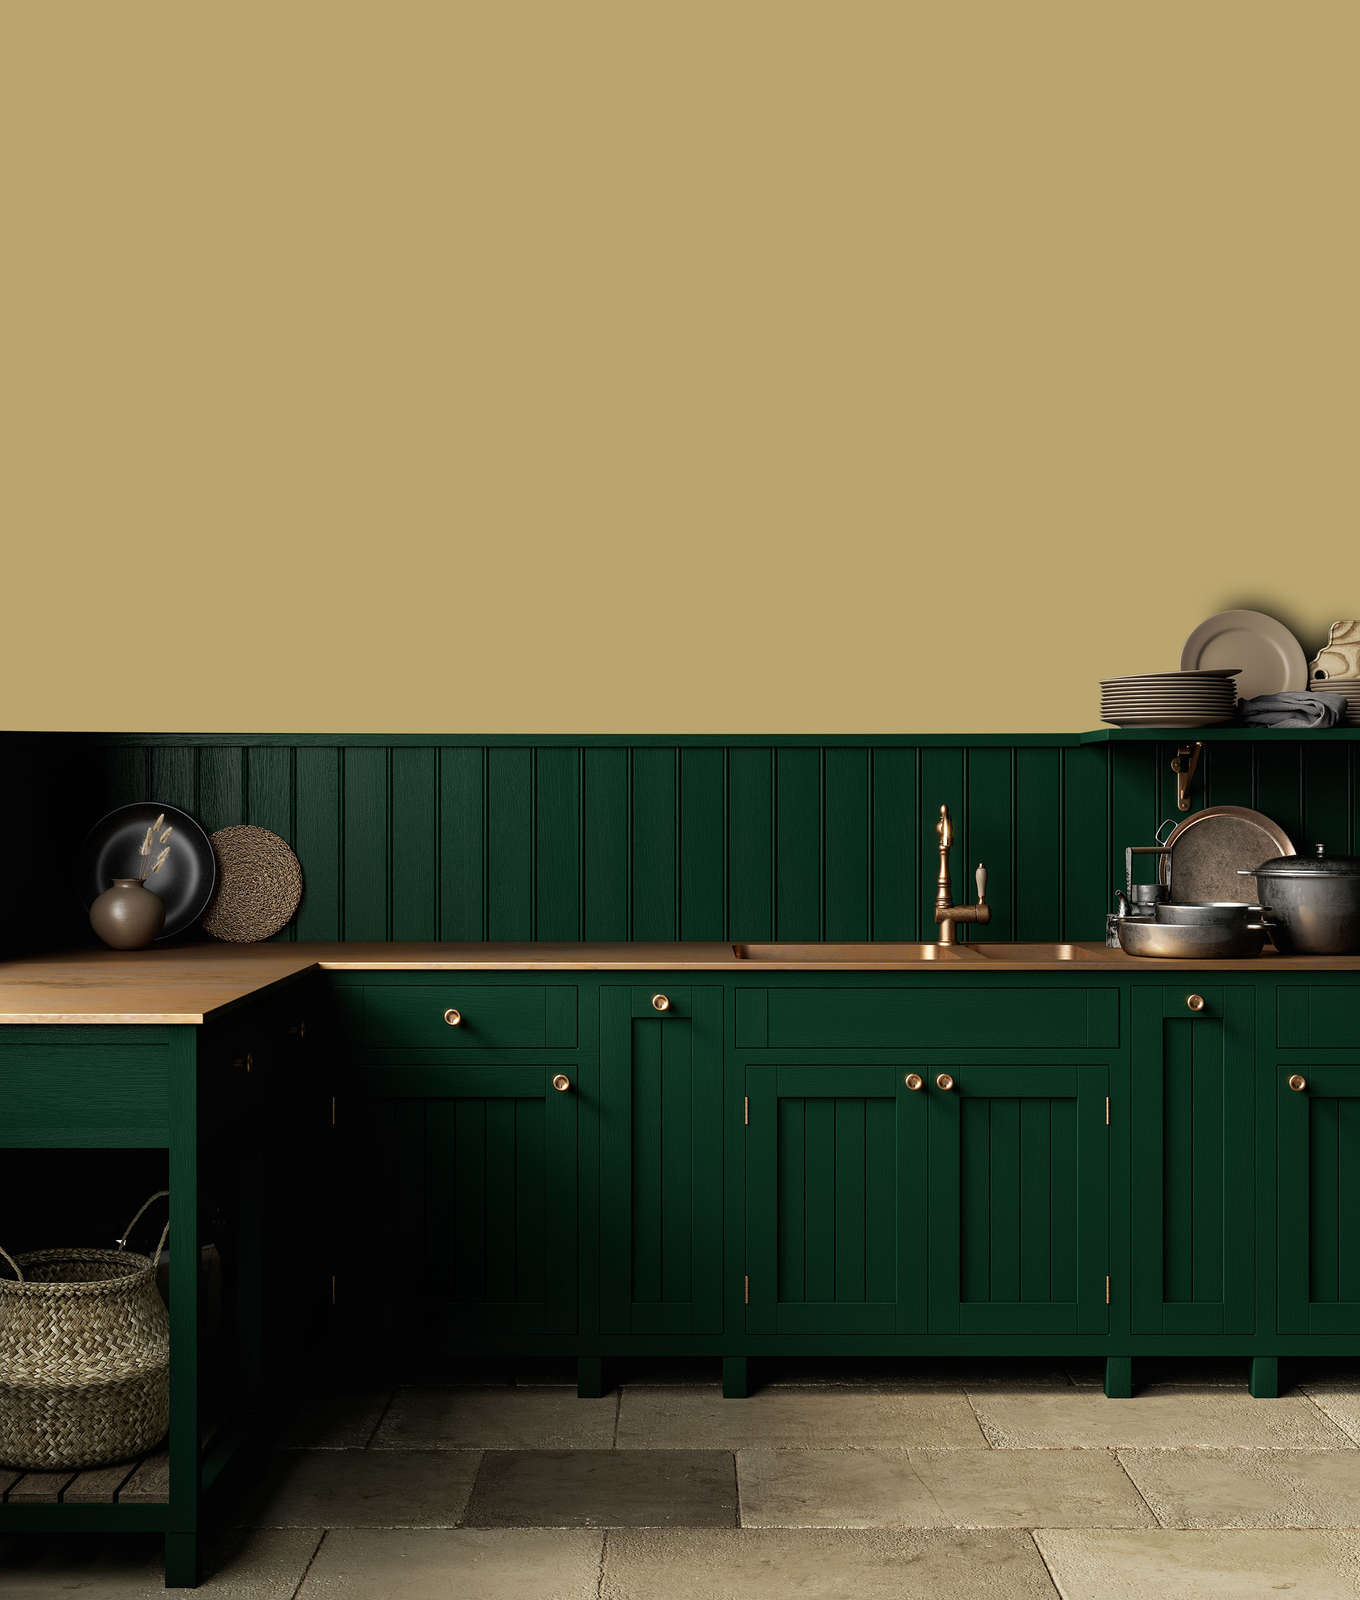             Premium Wall Paint Warm Khaki »Lucky Lime« NW605 – 2.5 litre
        